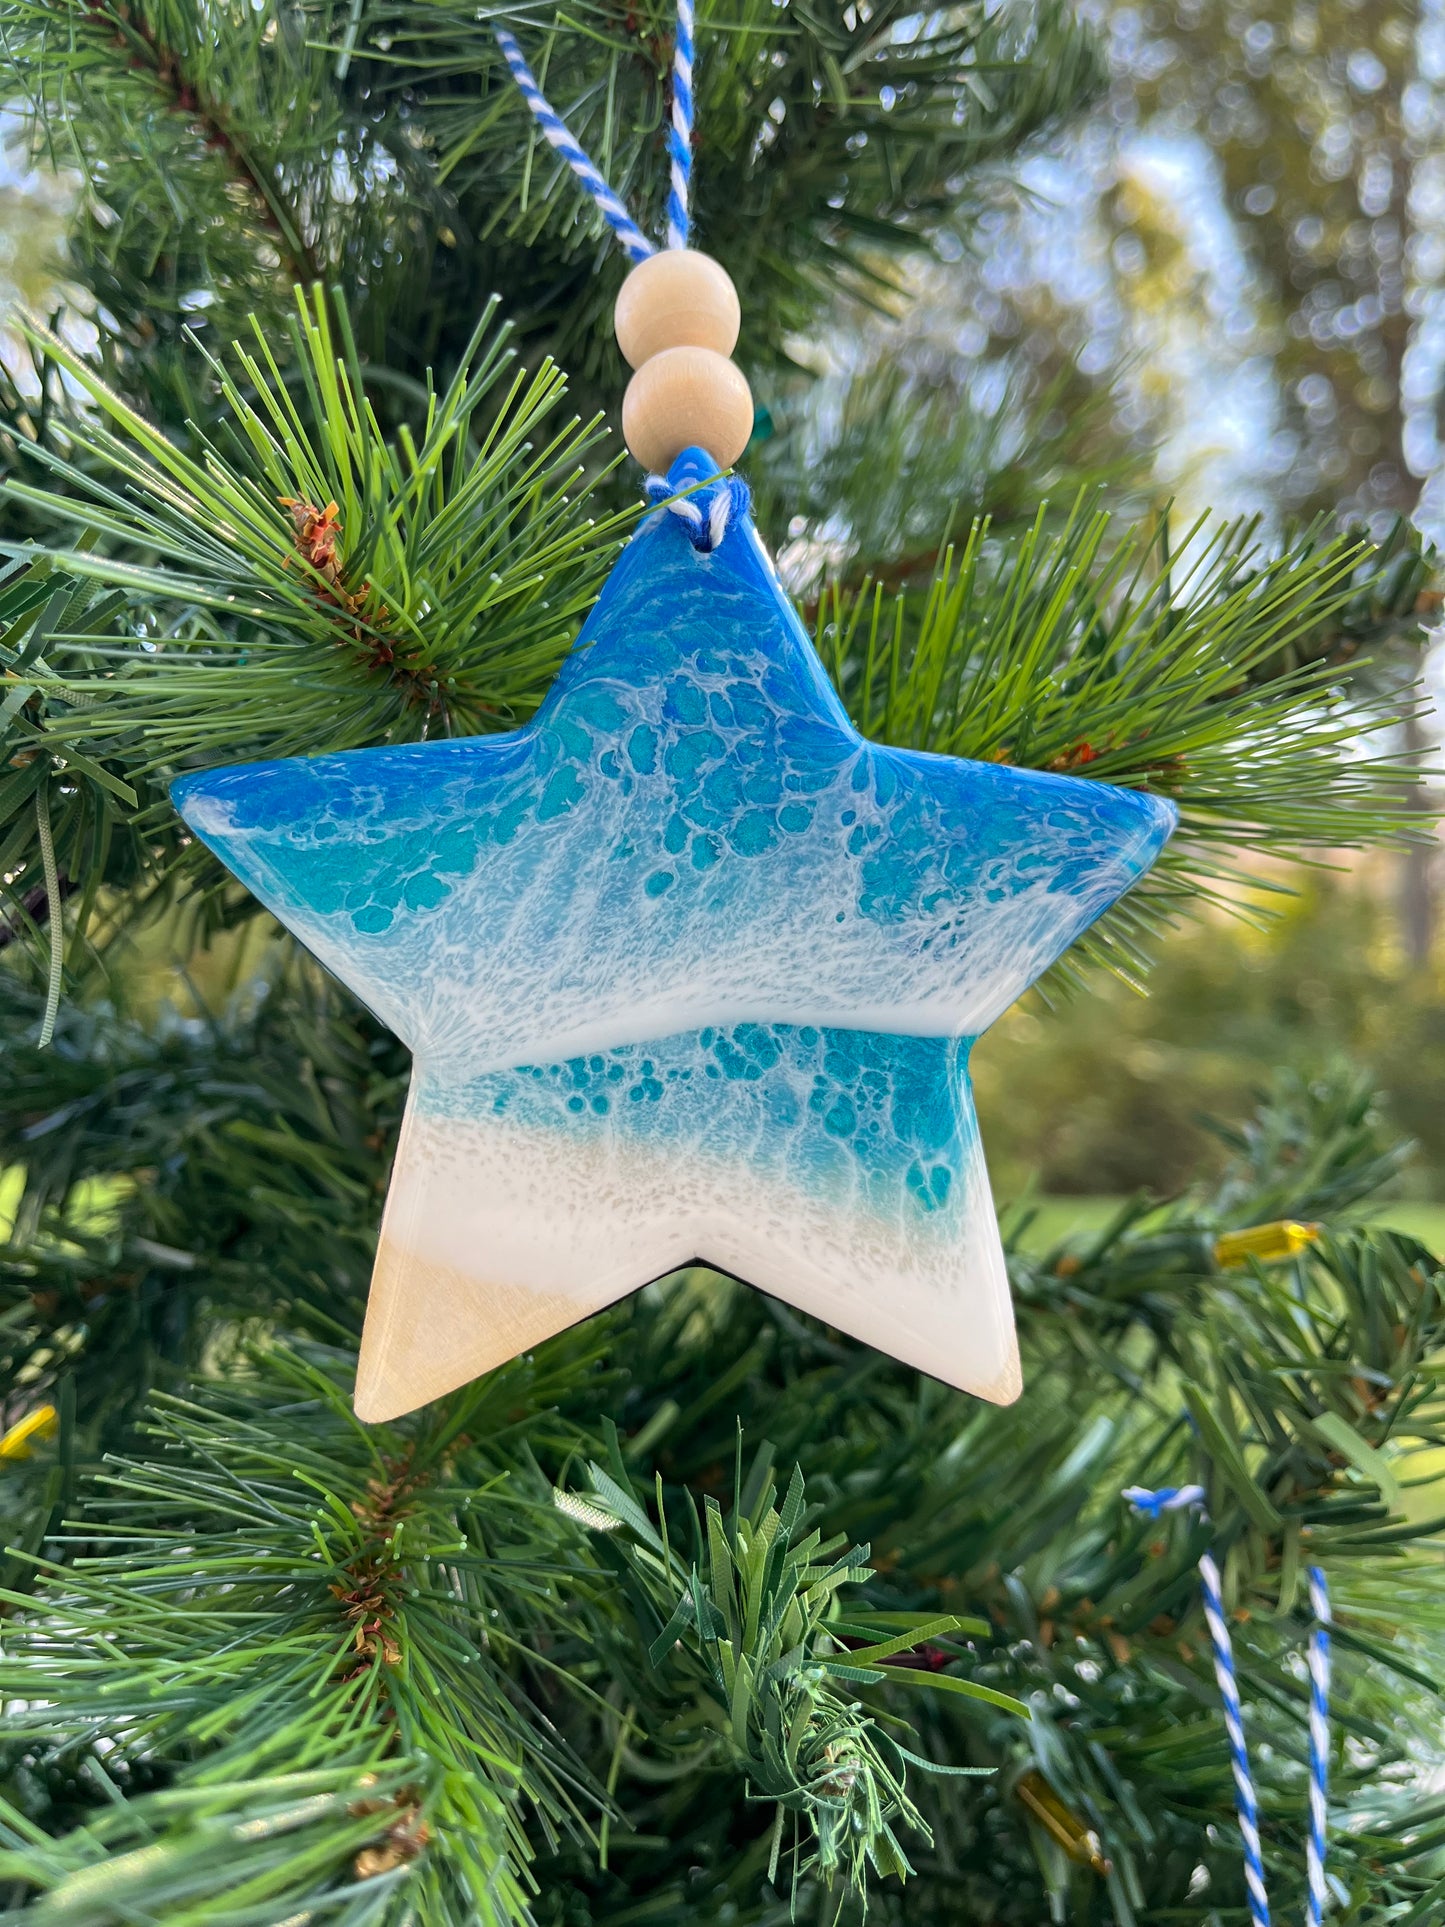 Star-shaped wooden Christmas ornament covered in blue and teal ocean resin art resembling the waves of the ocean.  Finished with blue and white baker's twine and two wooden beads